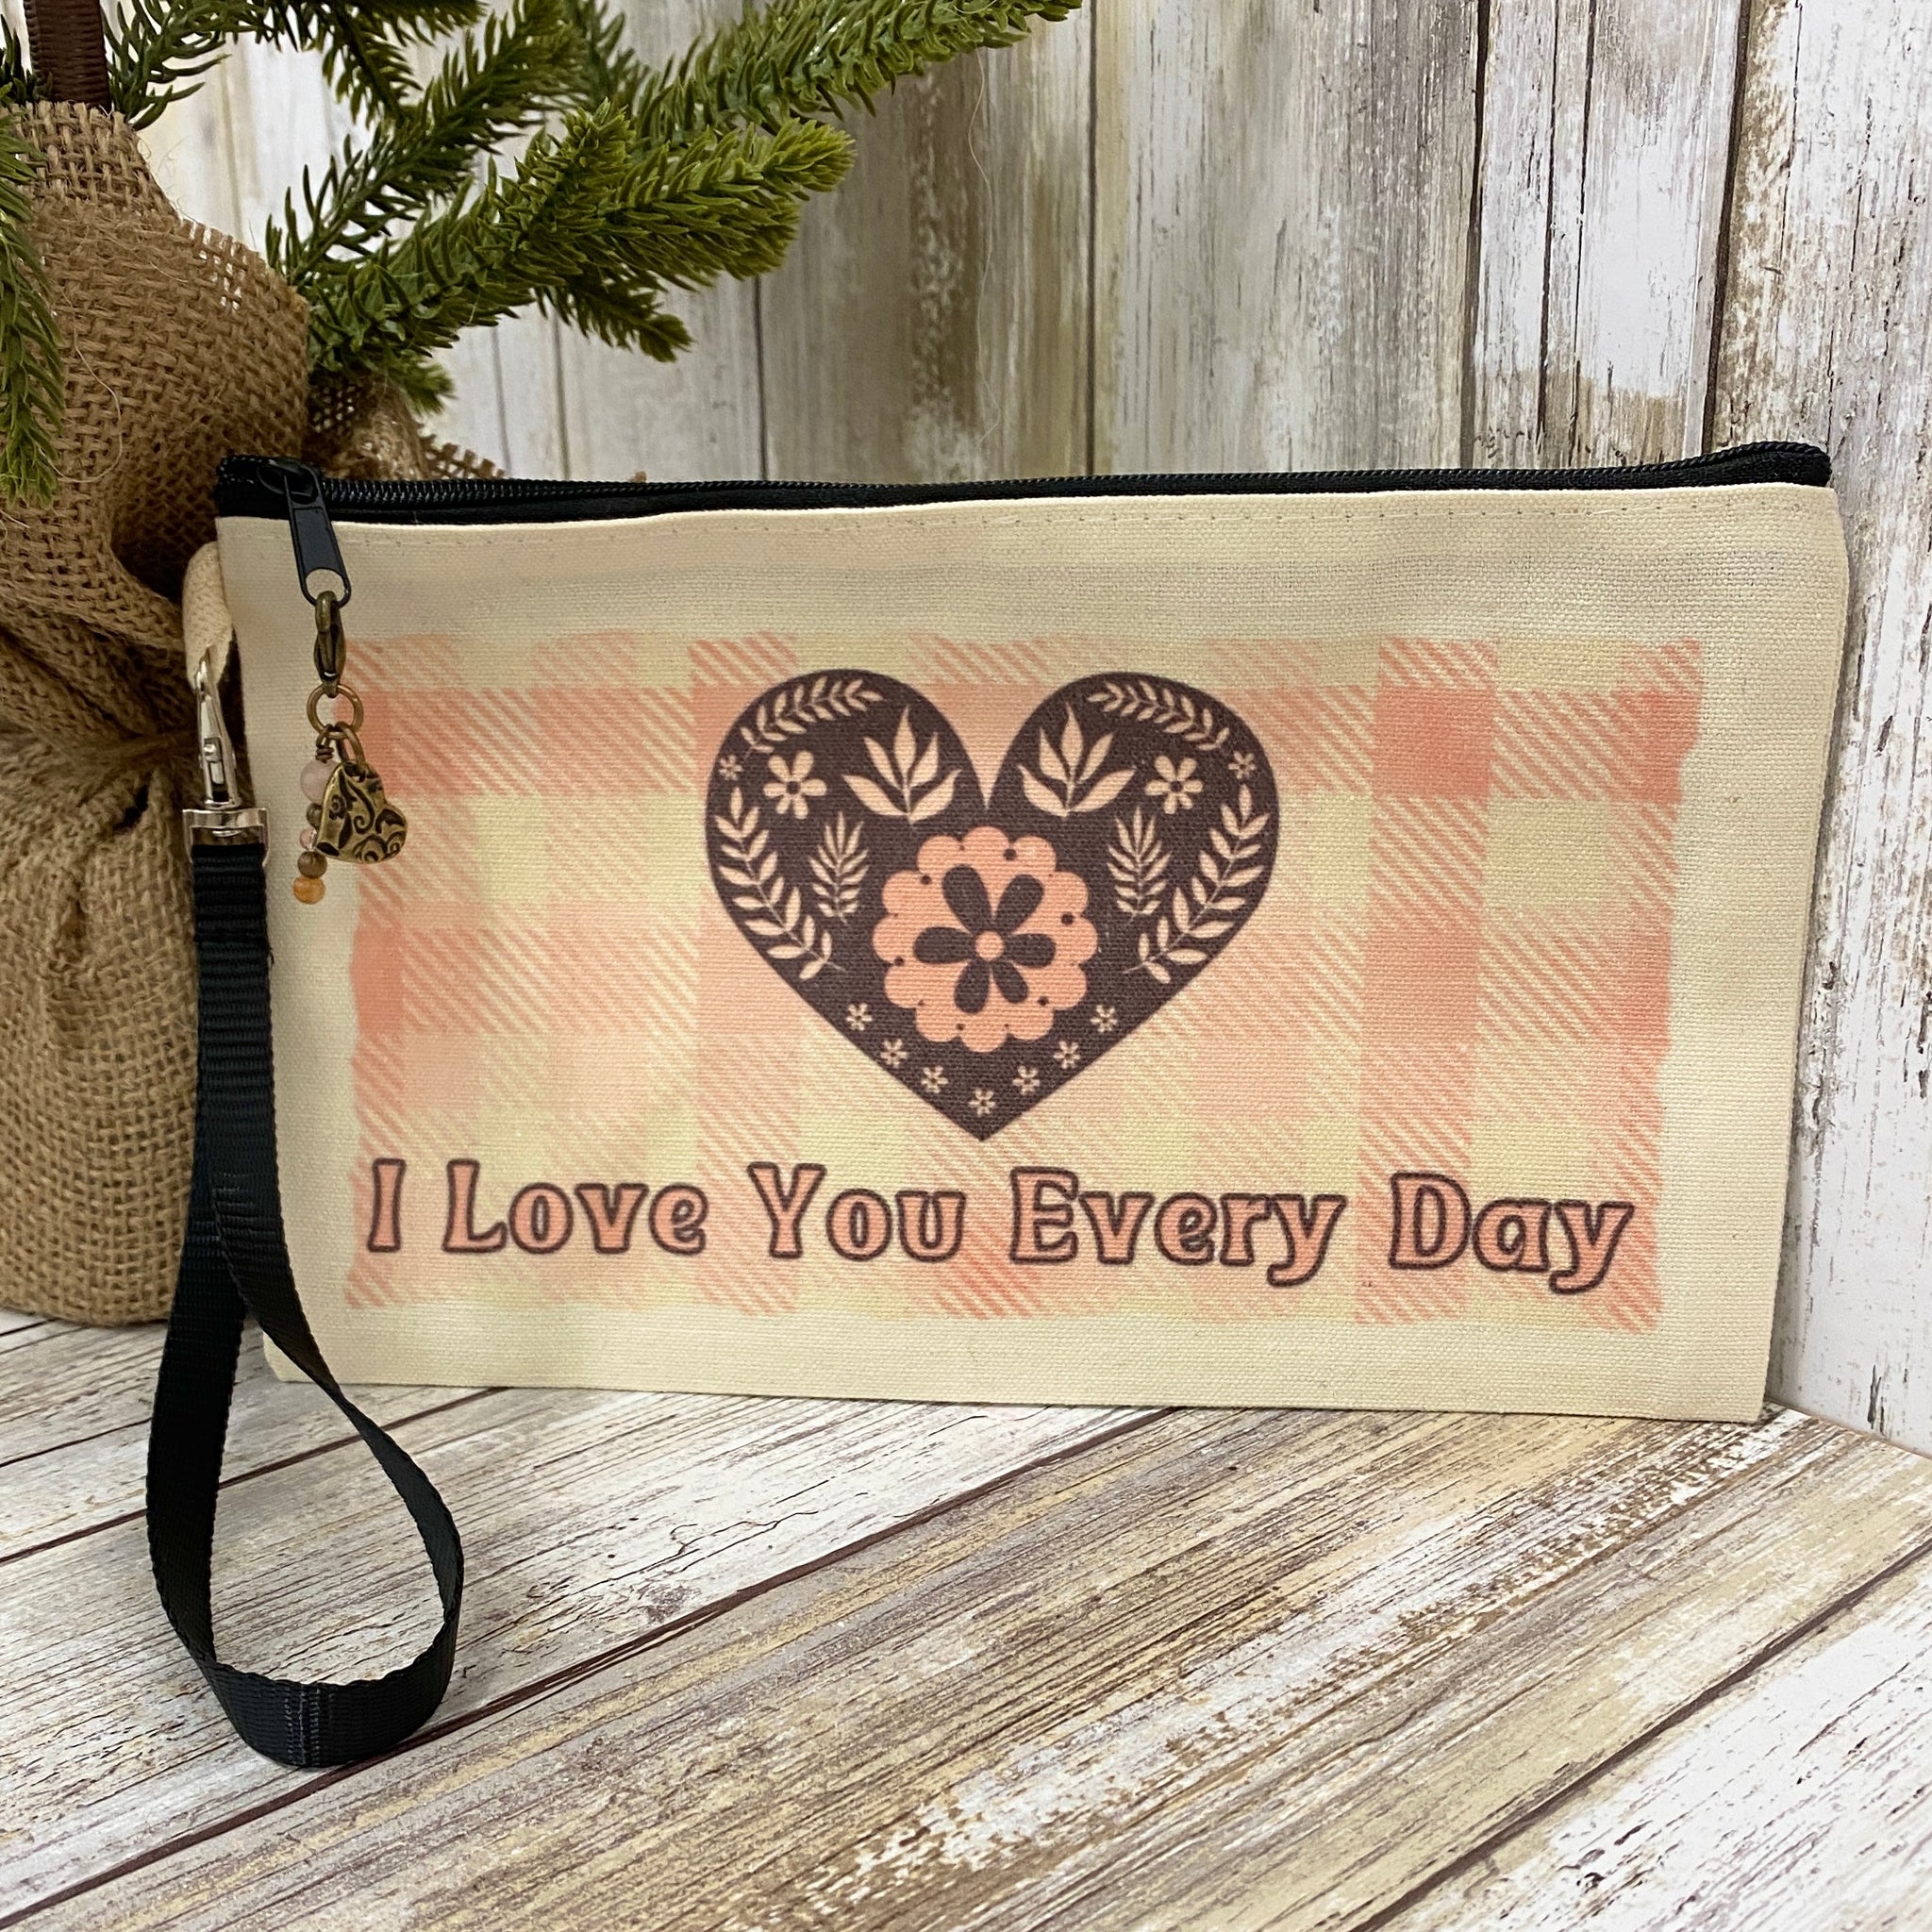 I Love You Everyday - Country Heart - Canvas Wristlet Purse